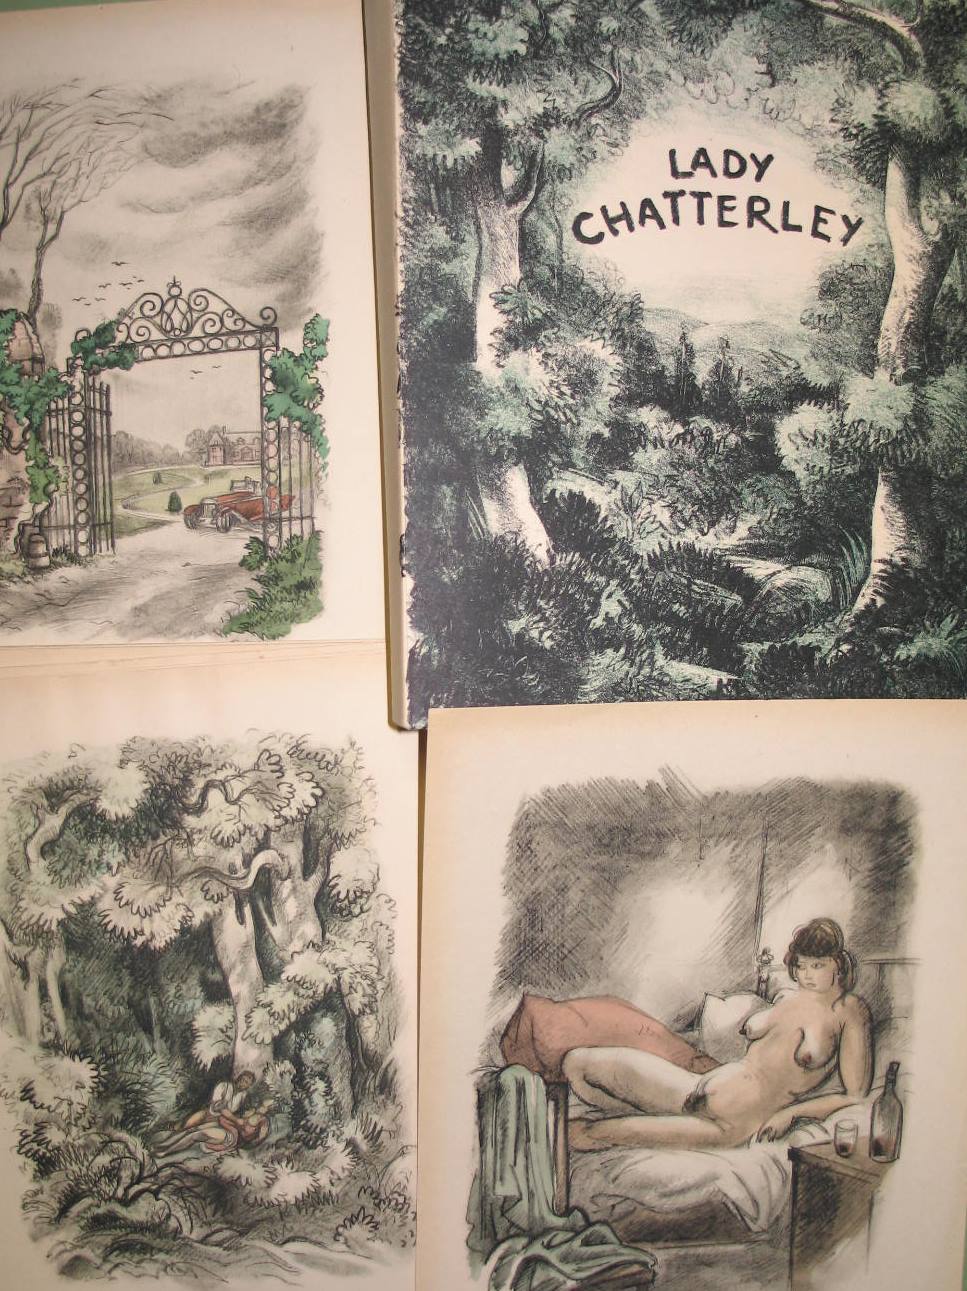 LAWRENCE (D. H.) Lady Chatterley, 4to, loose as issued, 20 col. litho. plates, card covers with